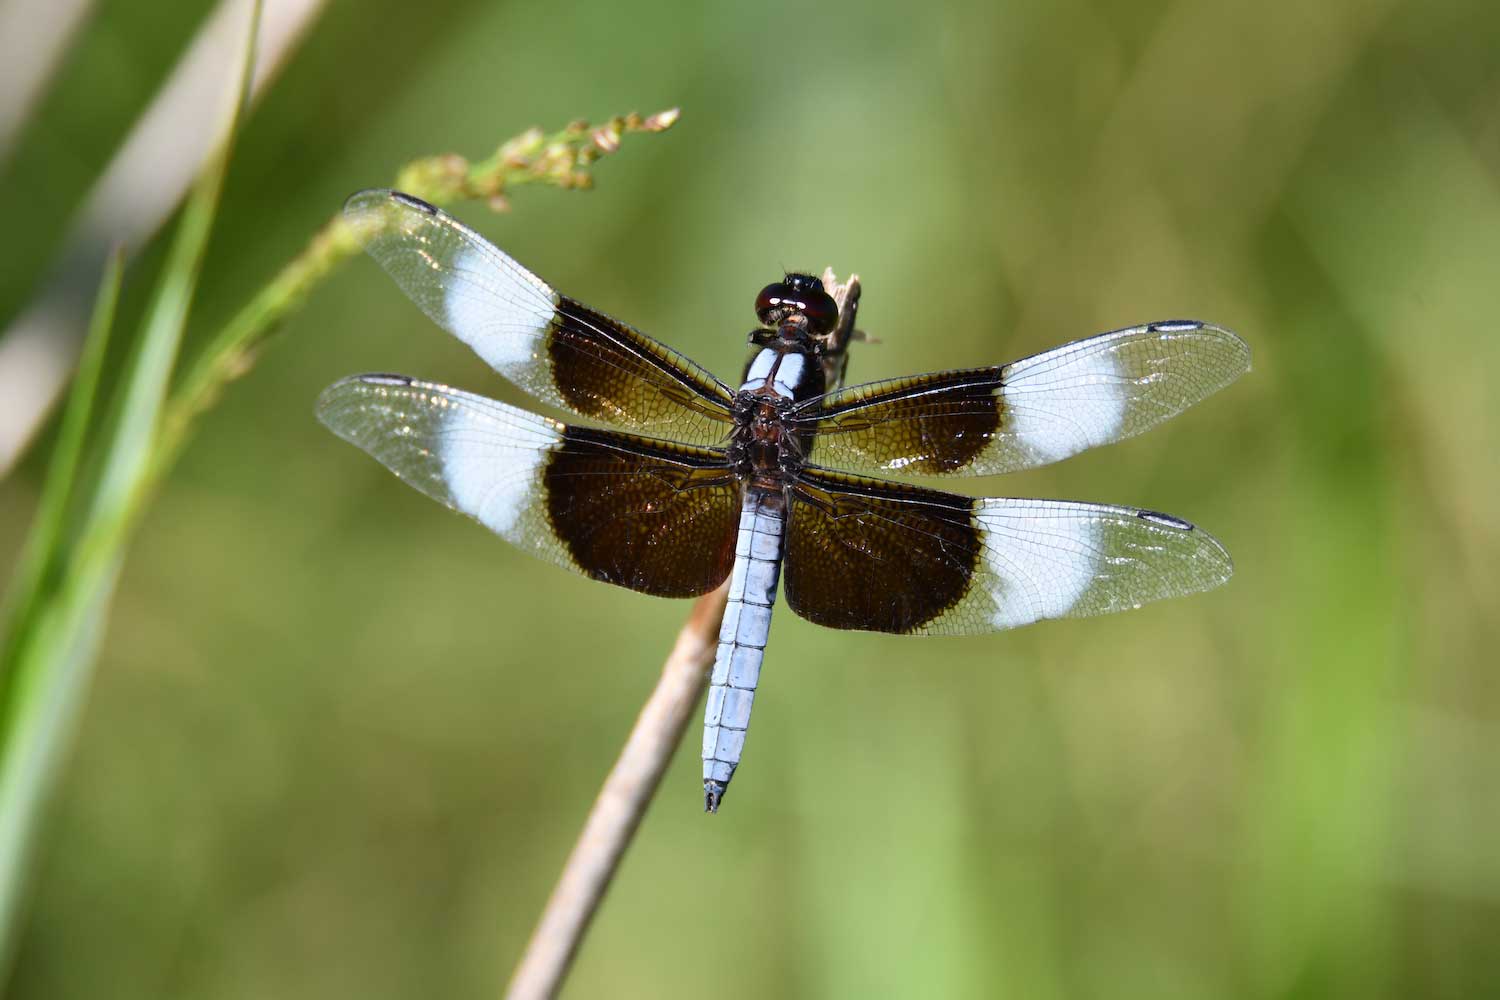 A dragonfly perched atop vegetation.